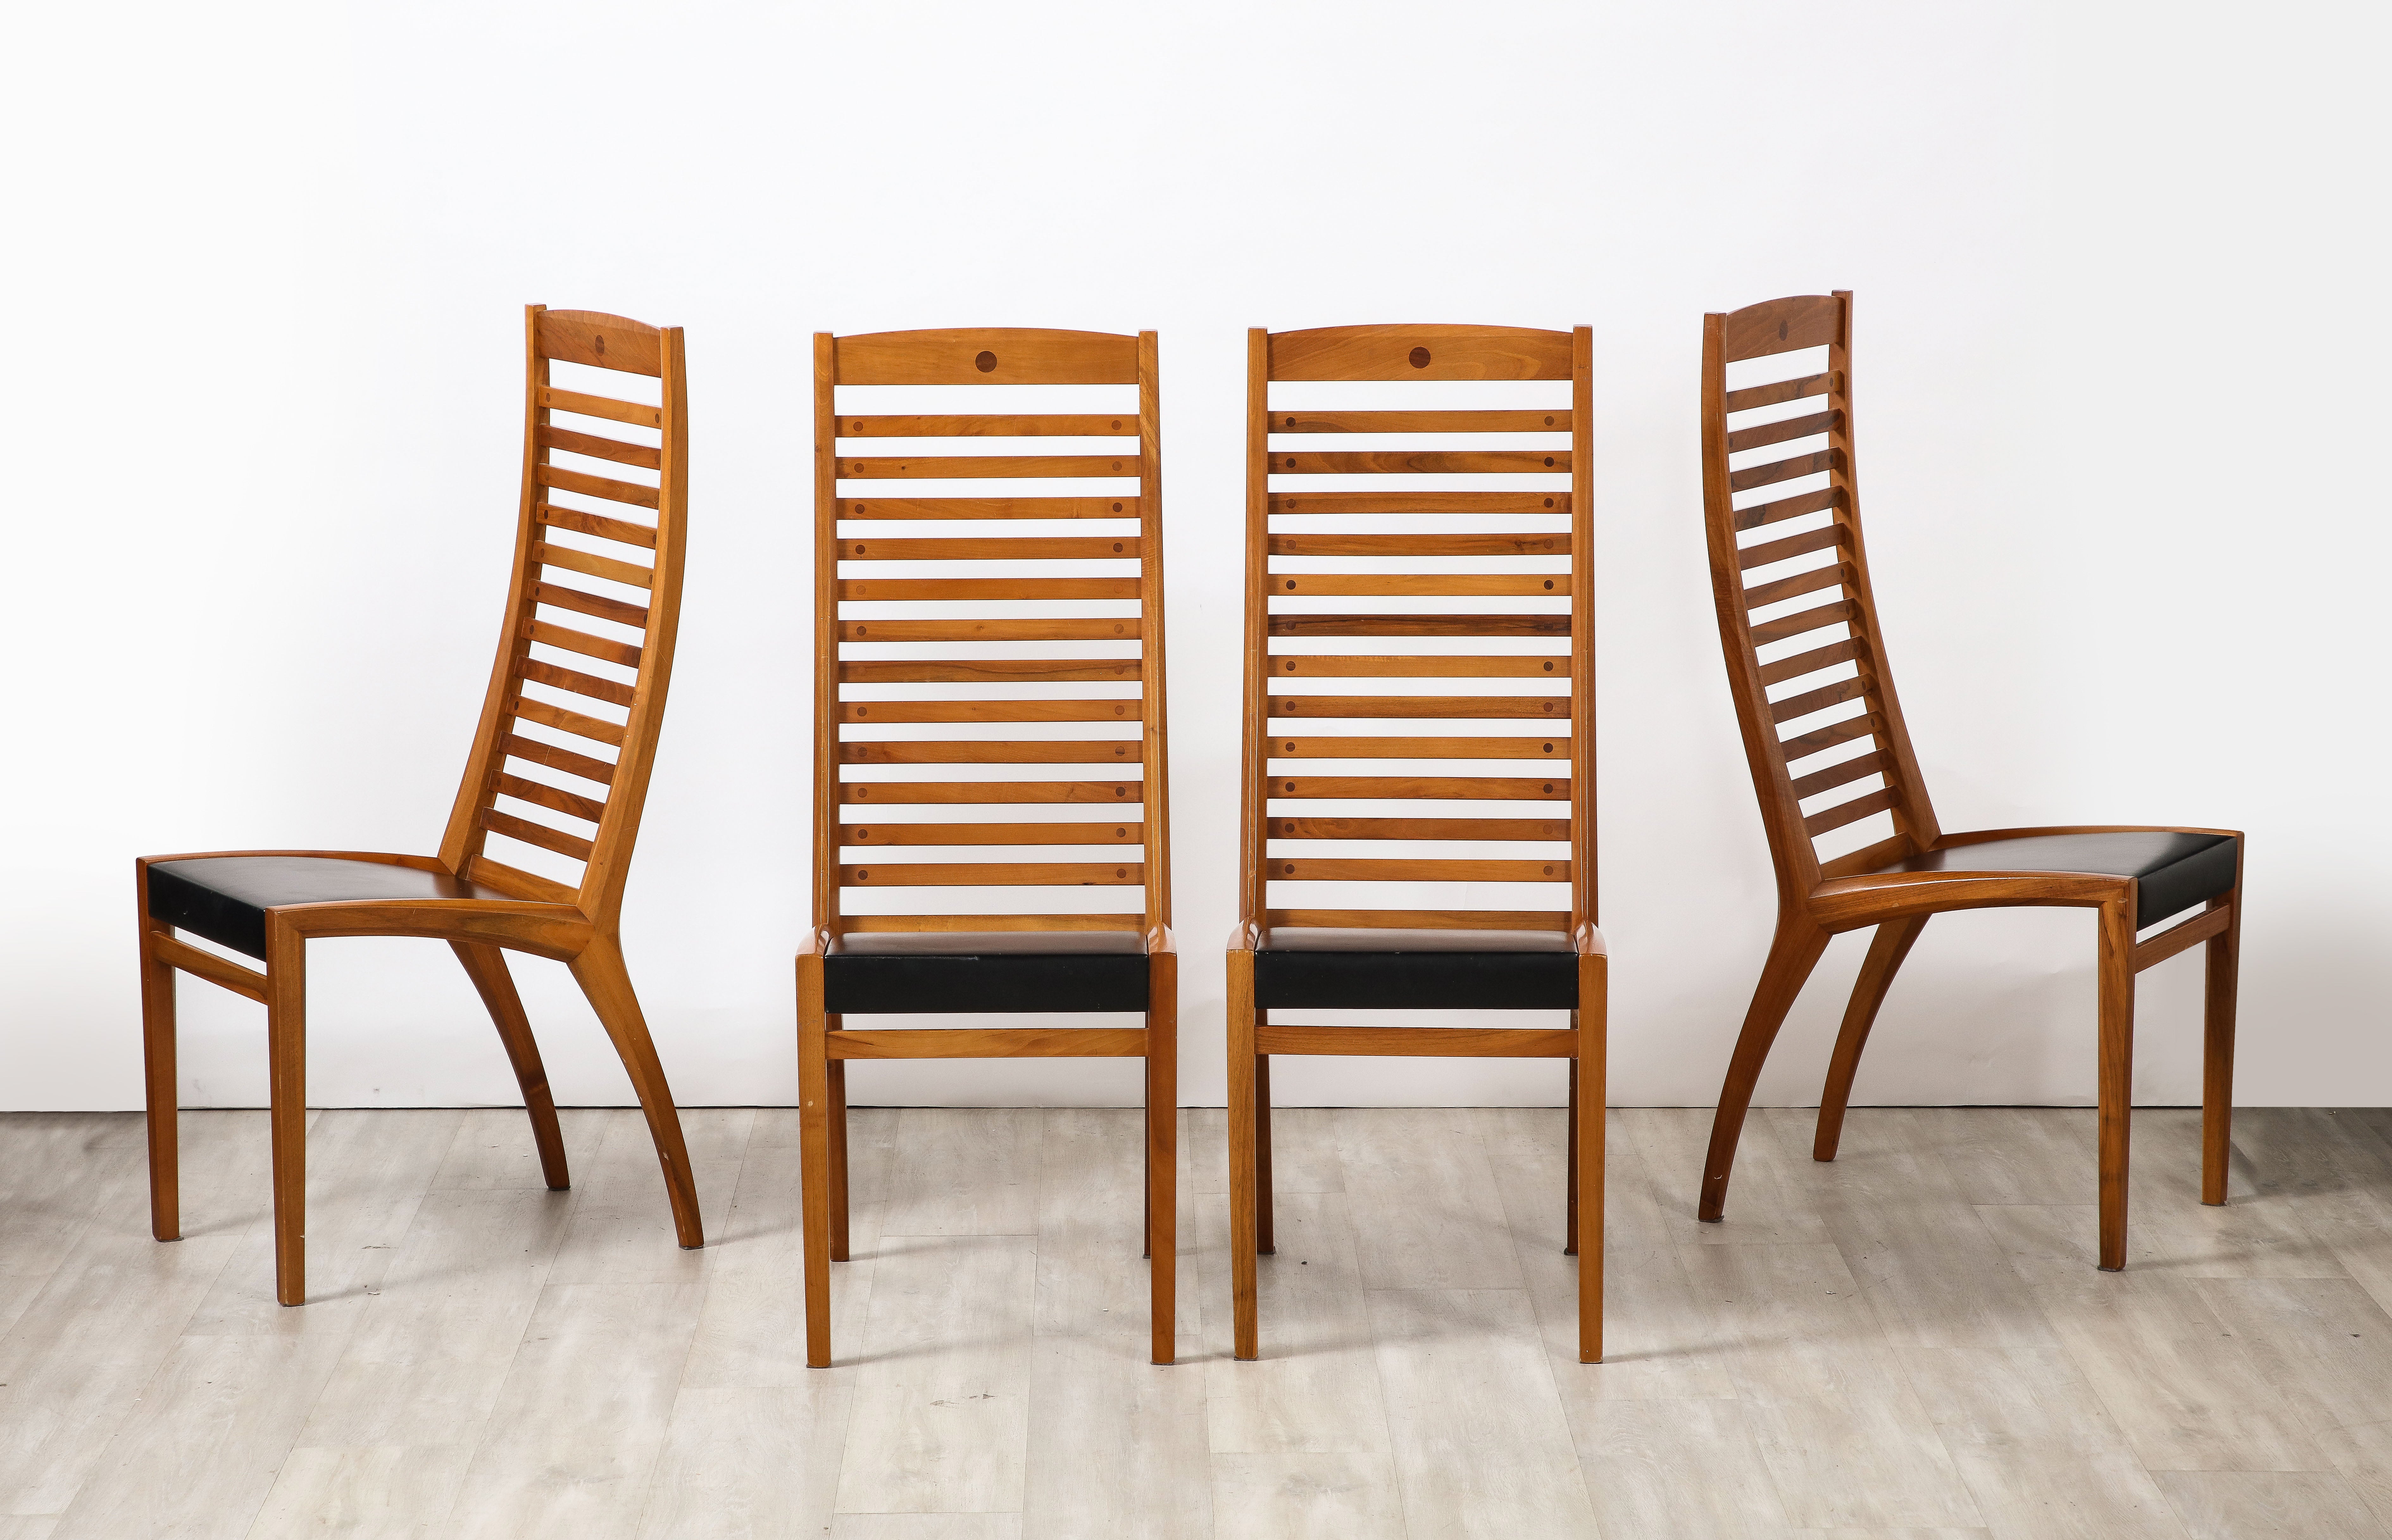 A set of four walnut ladder back dining chairs with original black leather seats, the seats and back legs are angled, with straight legs in the front.  The chairs from every perspective represent an elevated and sleek modernist design of the era.